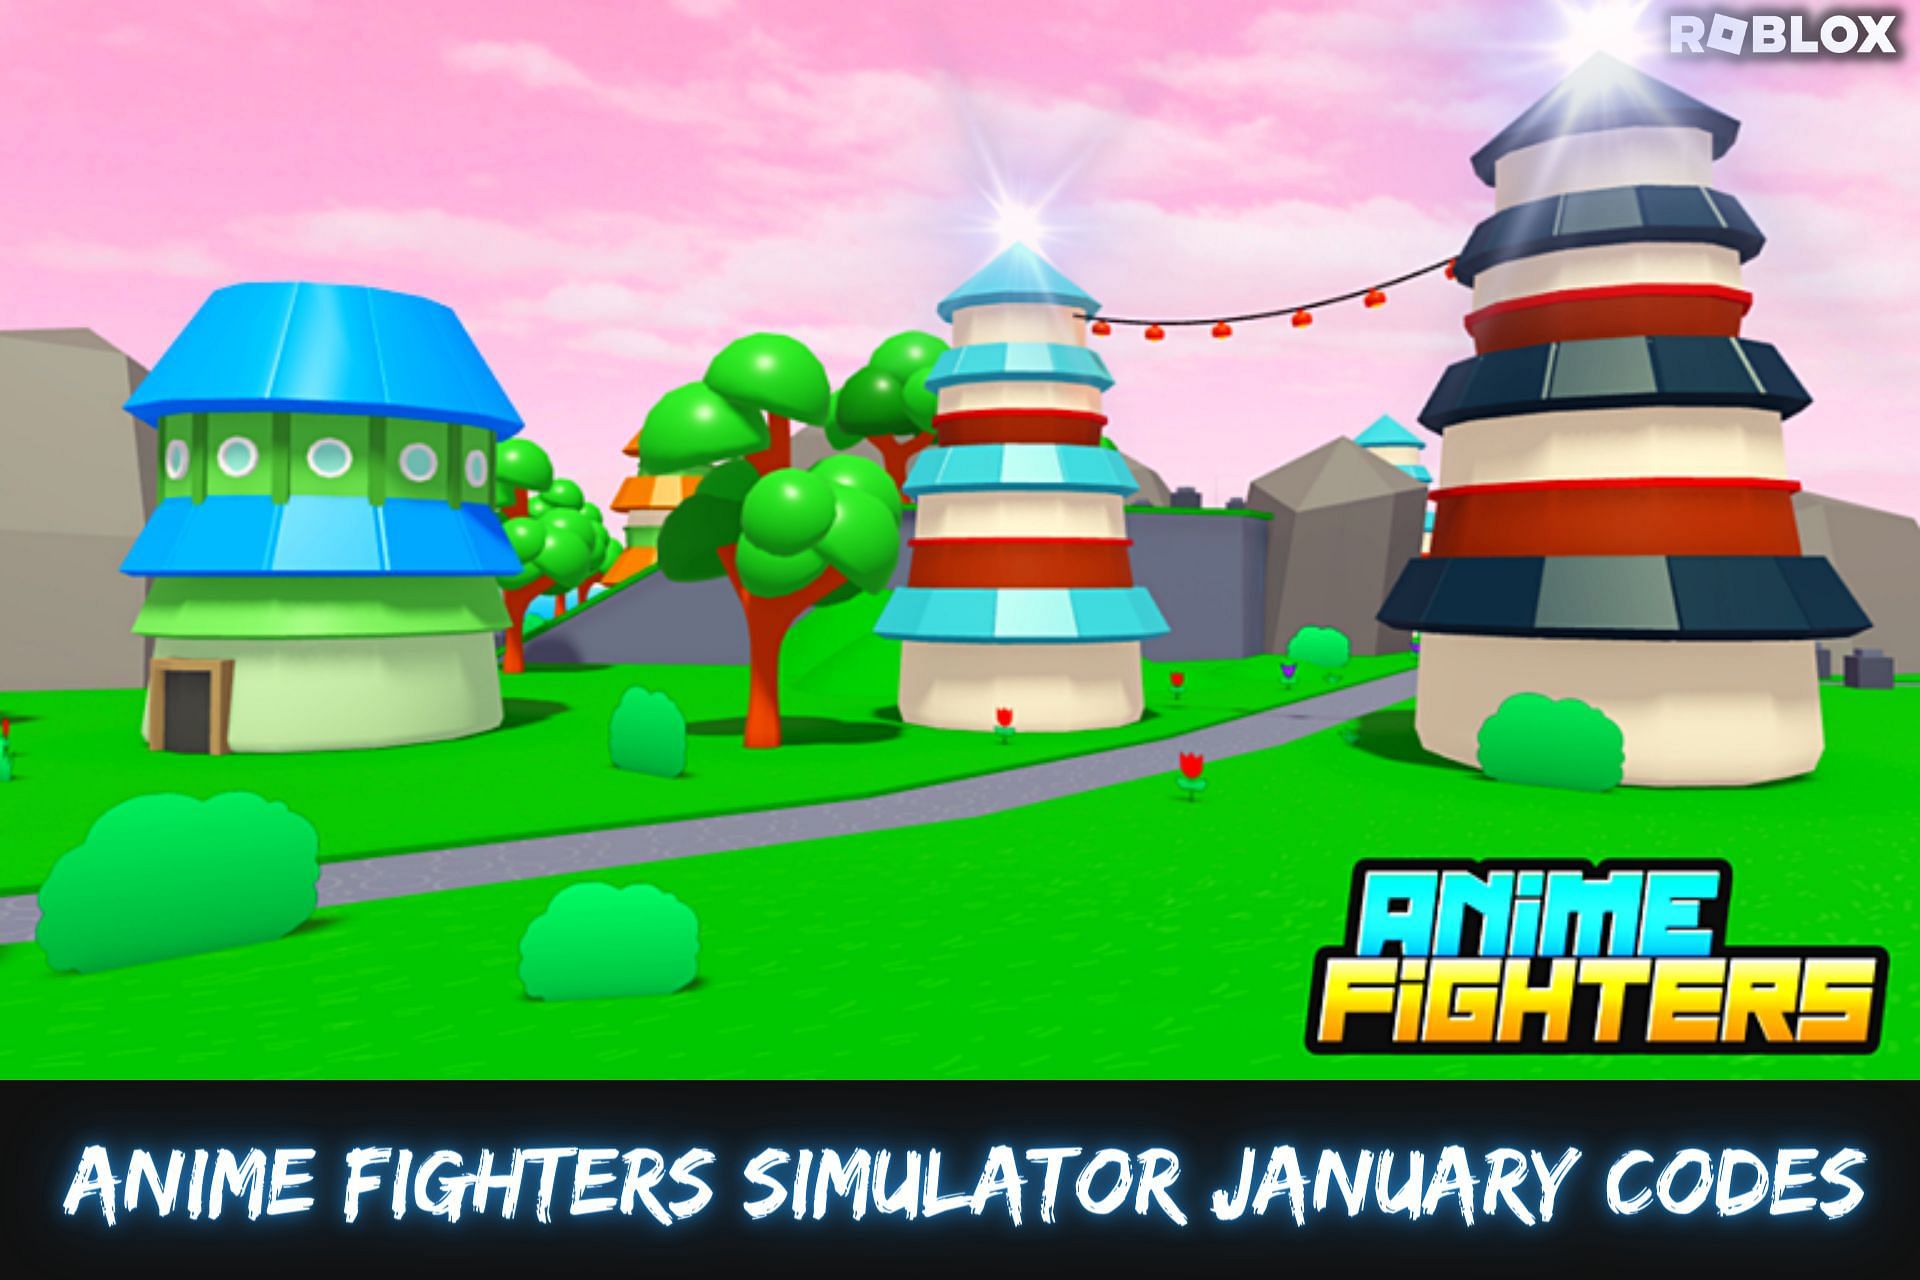 Roblox Anime Fighters Simulator codes (January 2023)